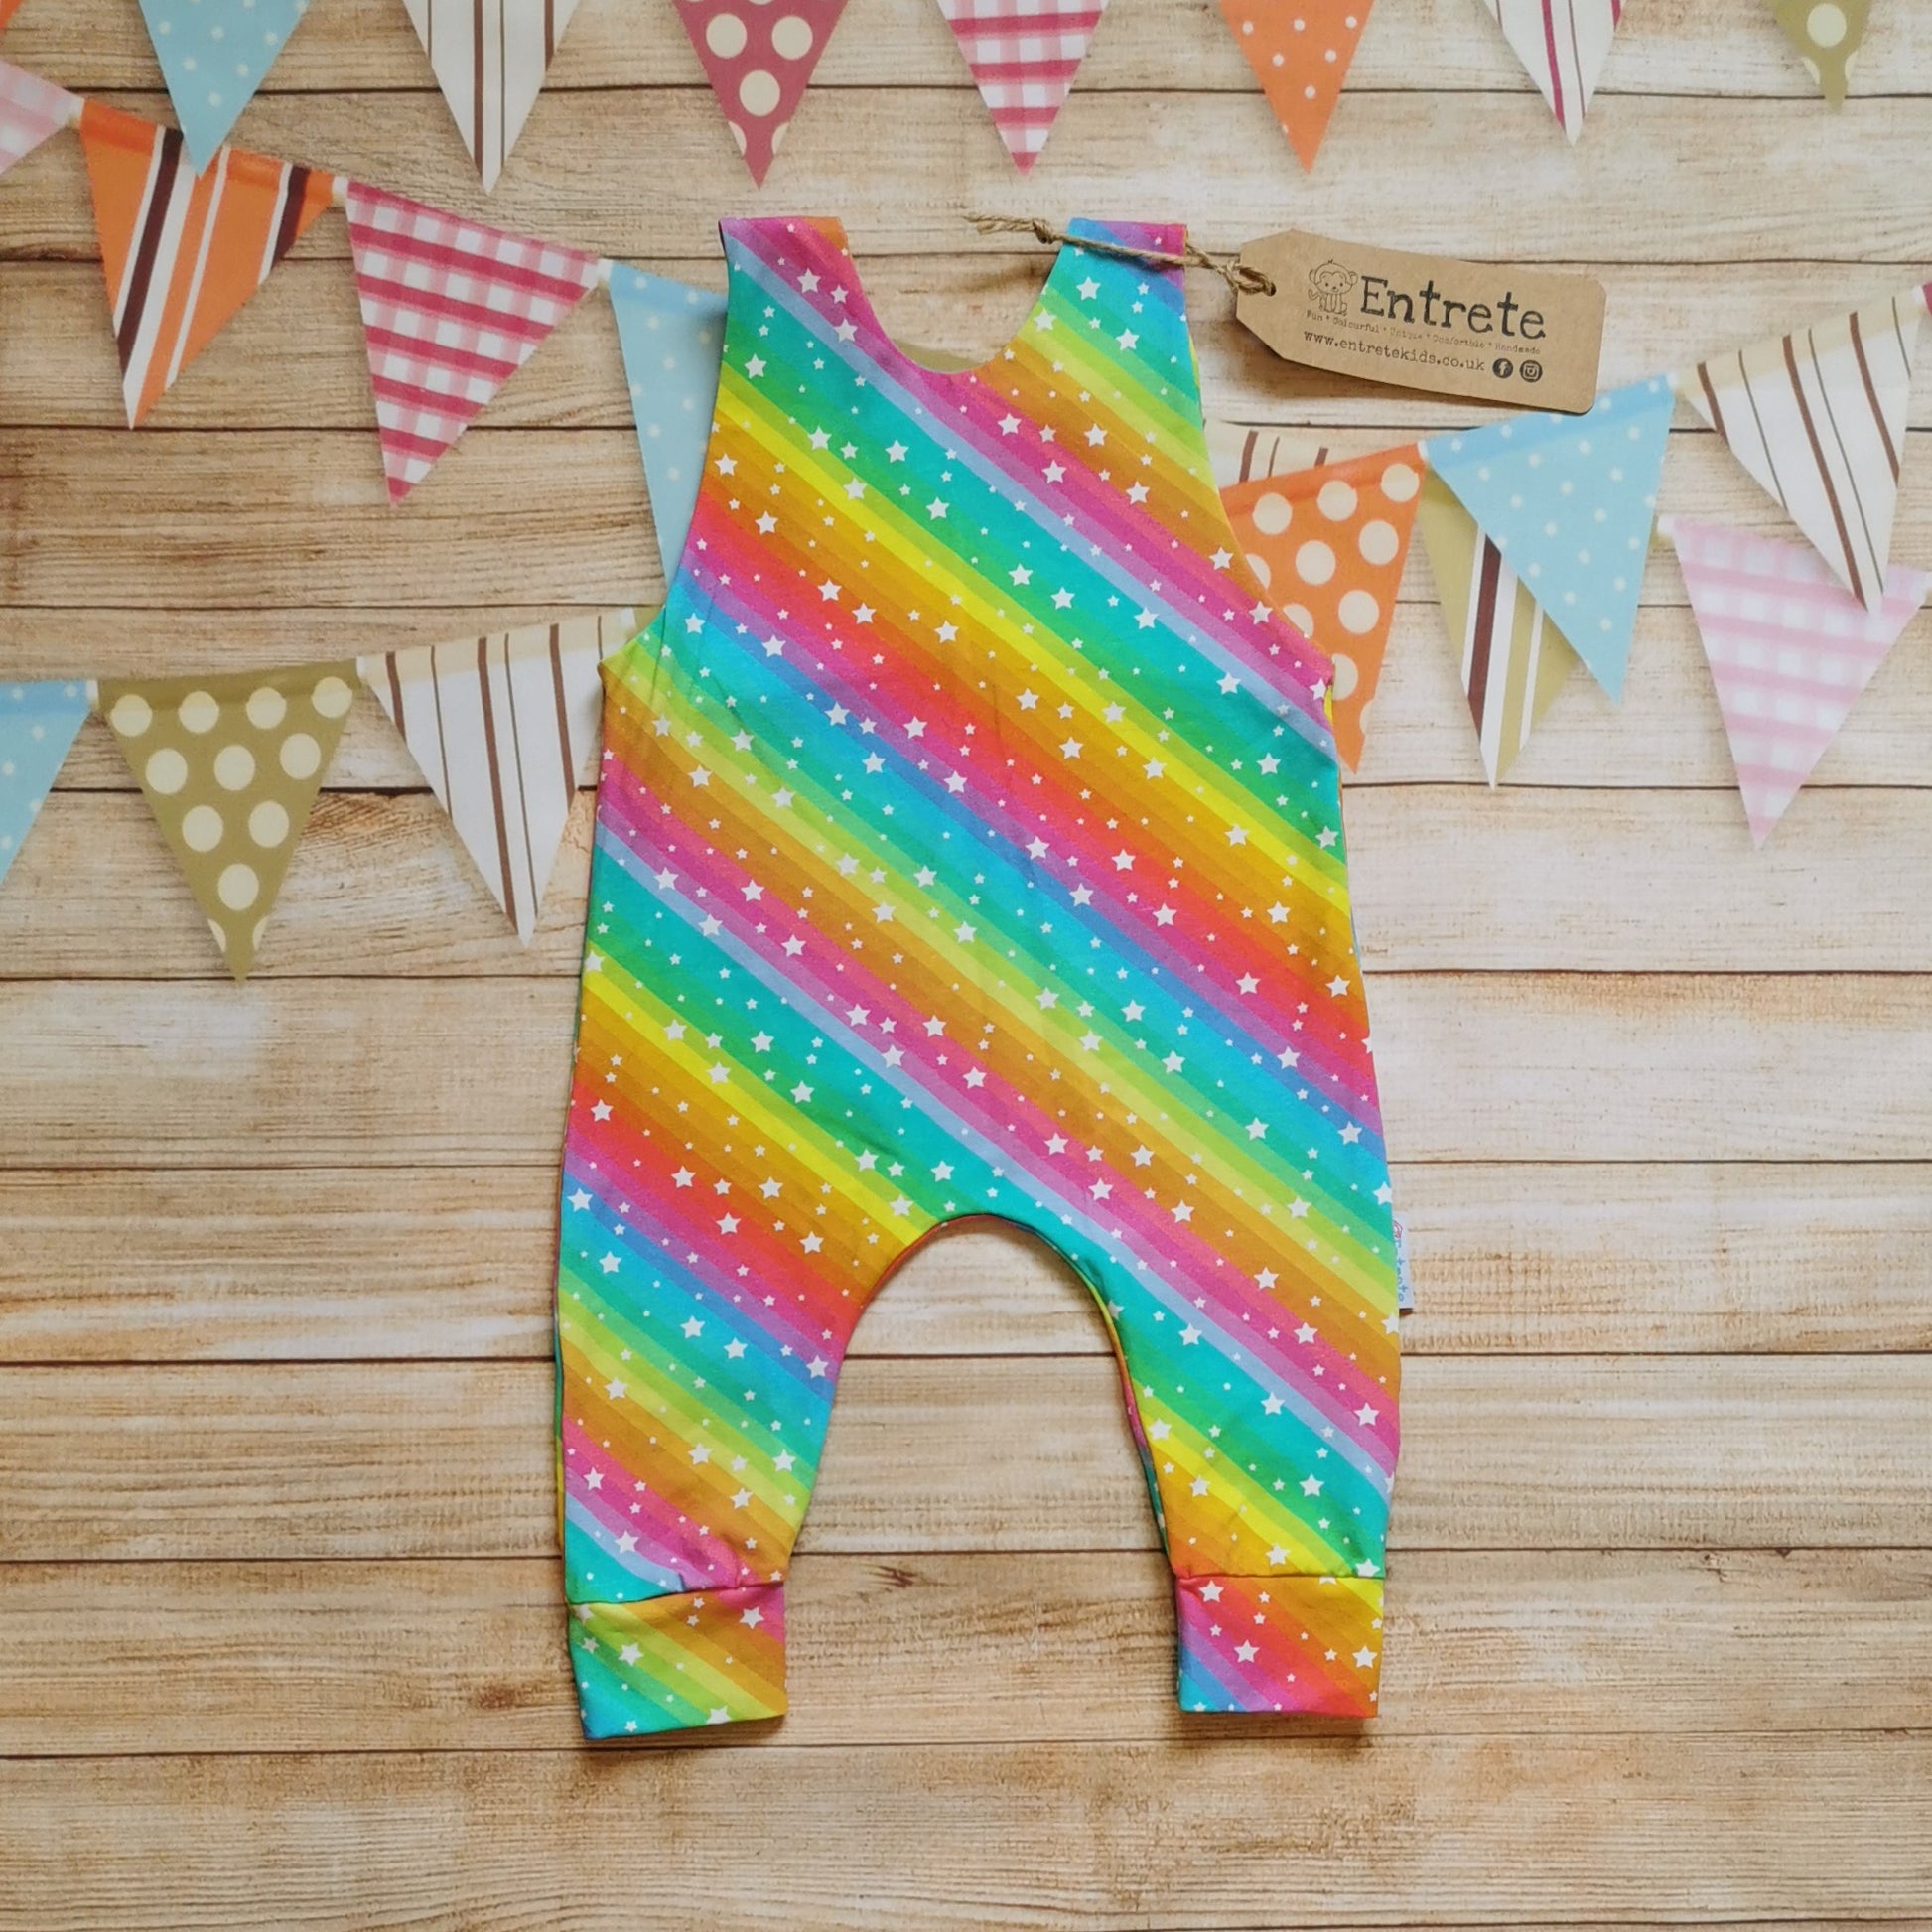 Rear of Girls & babies sleeveless romper, handmade using the vivid bright rainbow stars cotton jersey. With shoulder popper entry.